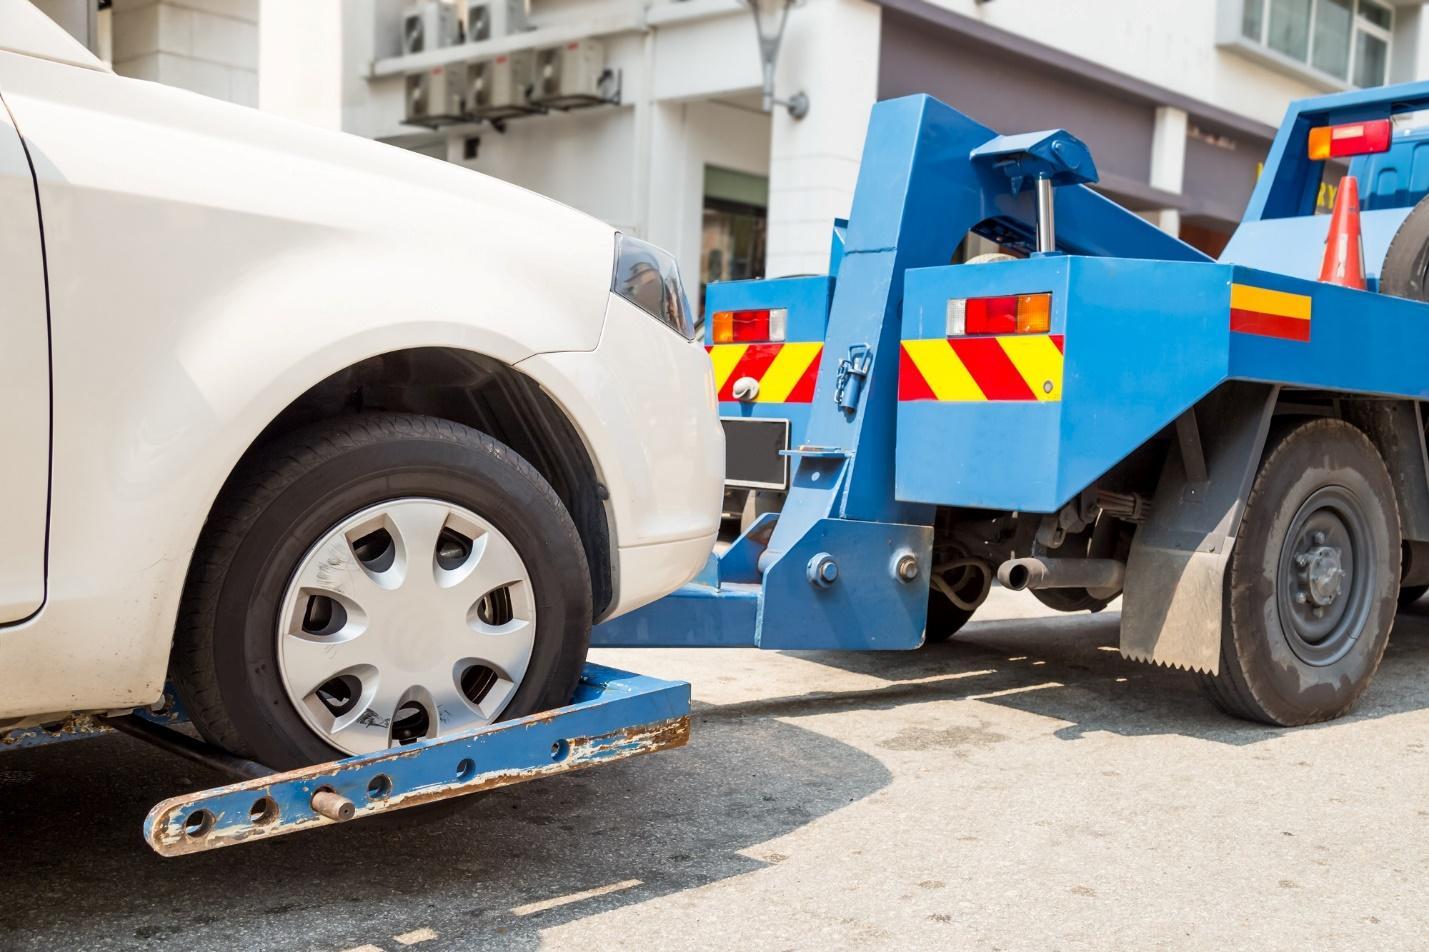 Frequently Asked Questions about 24 Hour Towing Services Answered | Speed's Towing